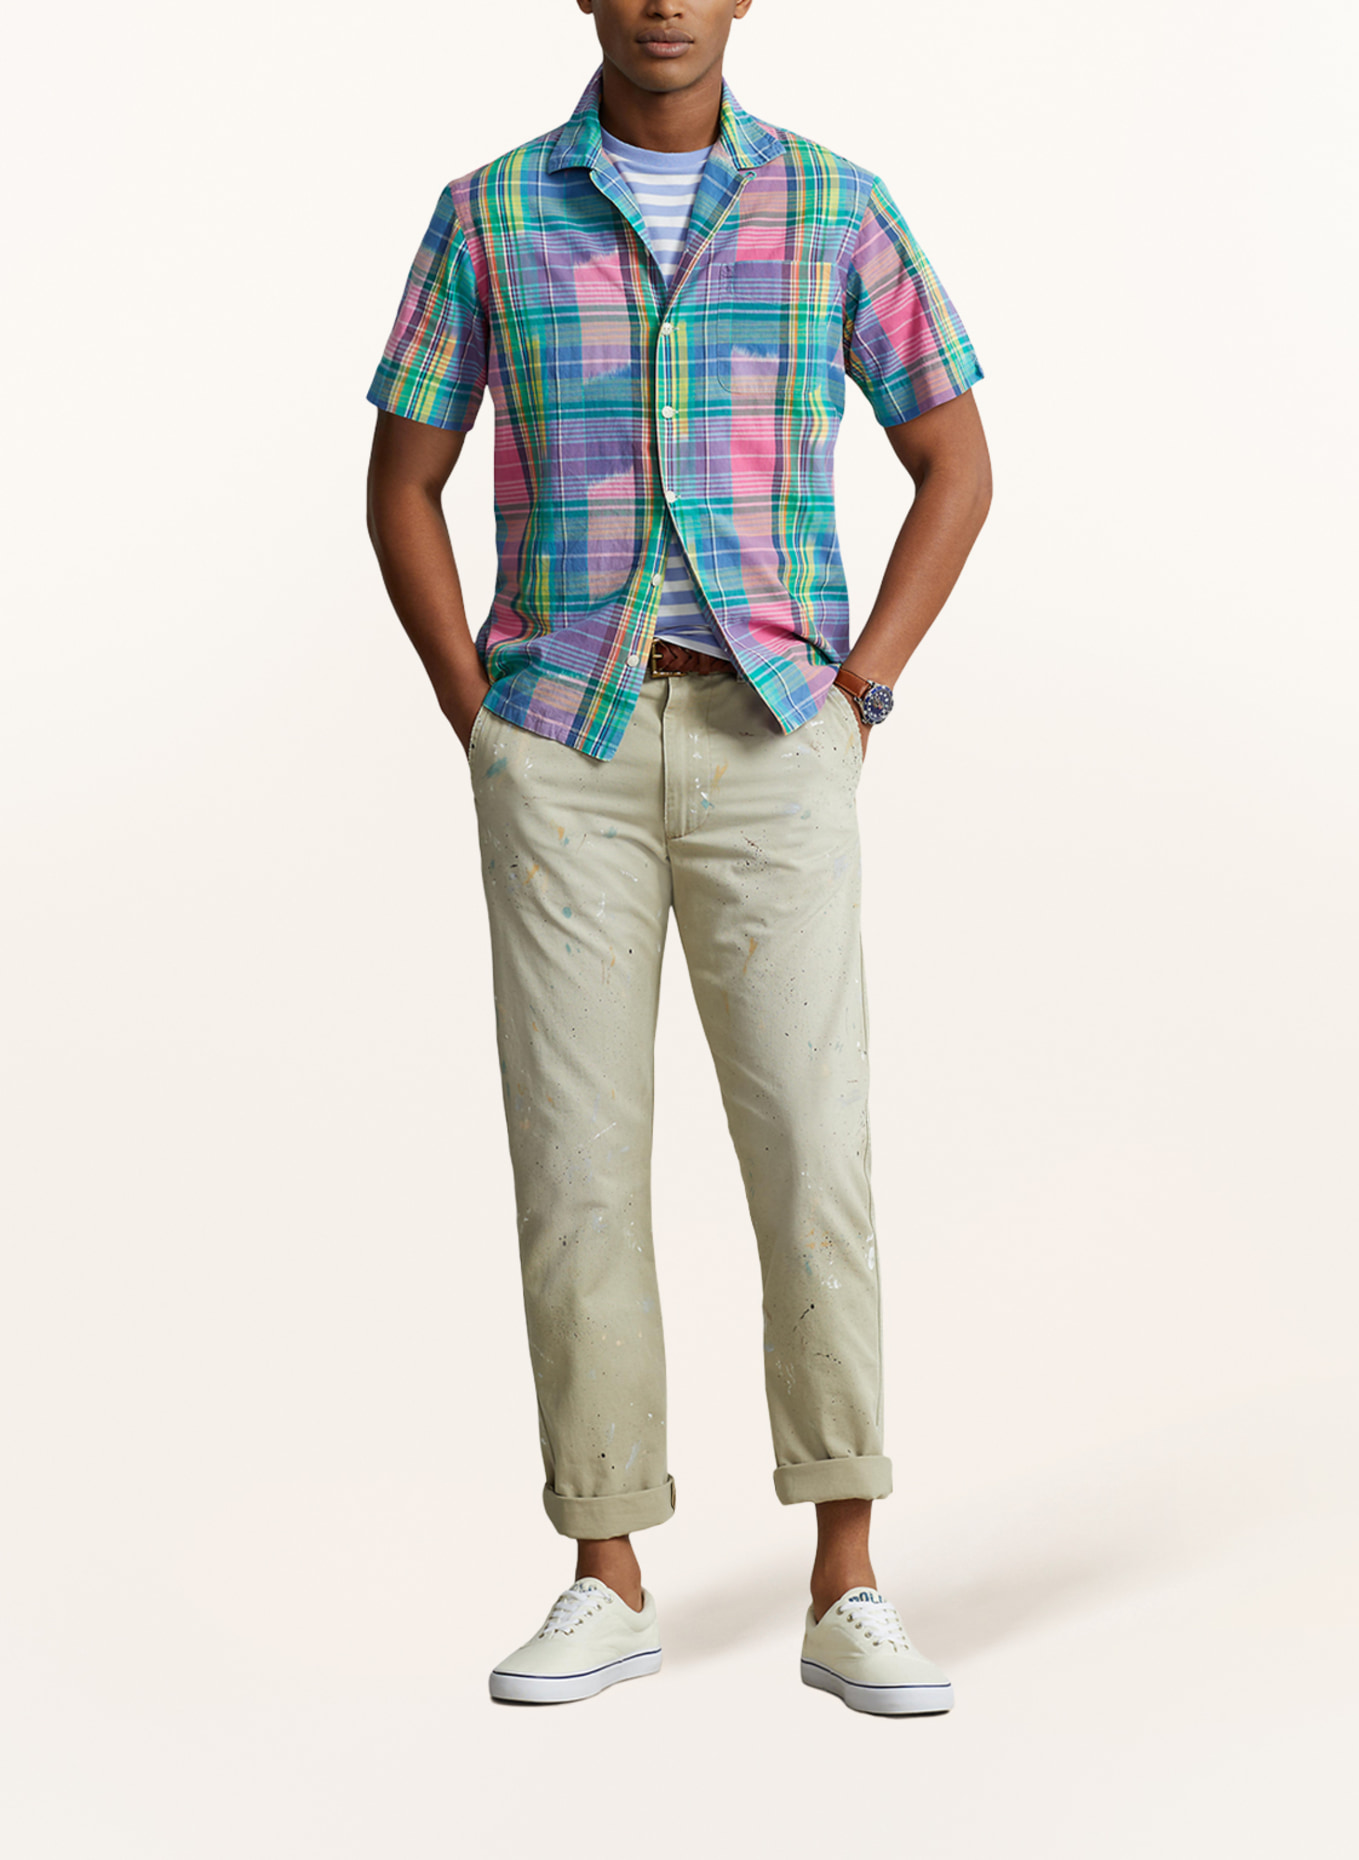 POLO RALPH LAUREN Short sleeve shirt MADRAS classic fit, Color: GREEN/ PINK/ BLUE (Image 2)